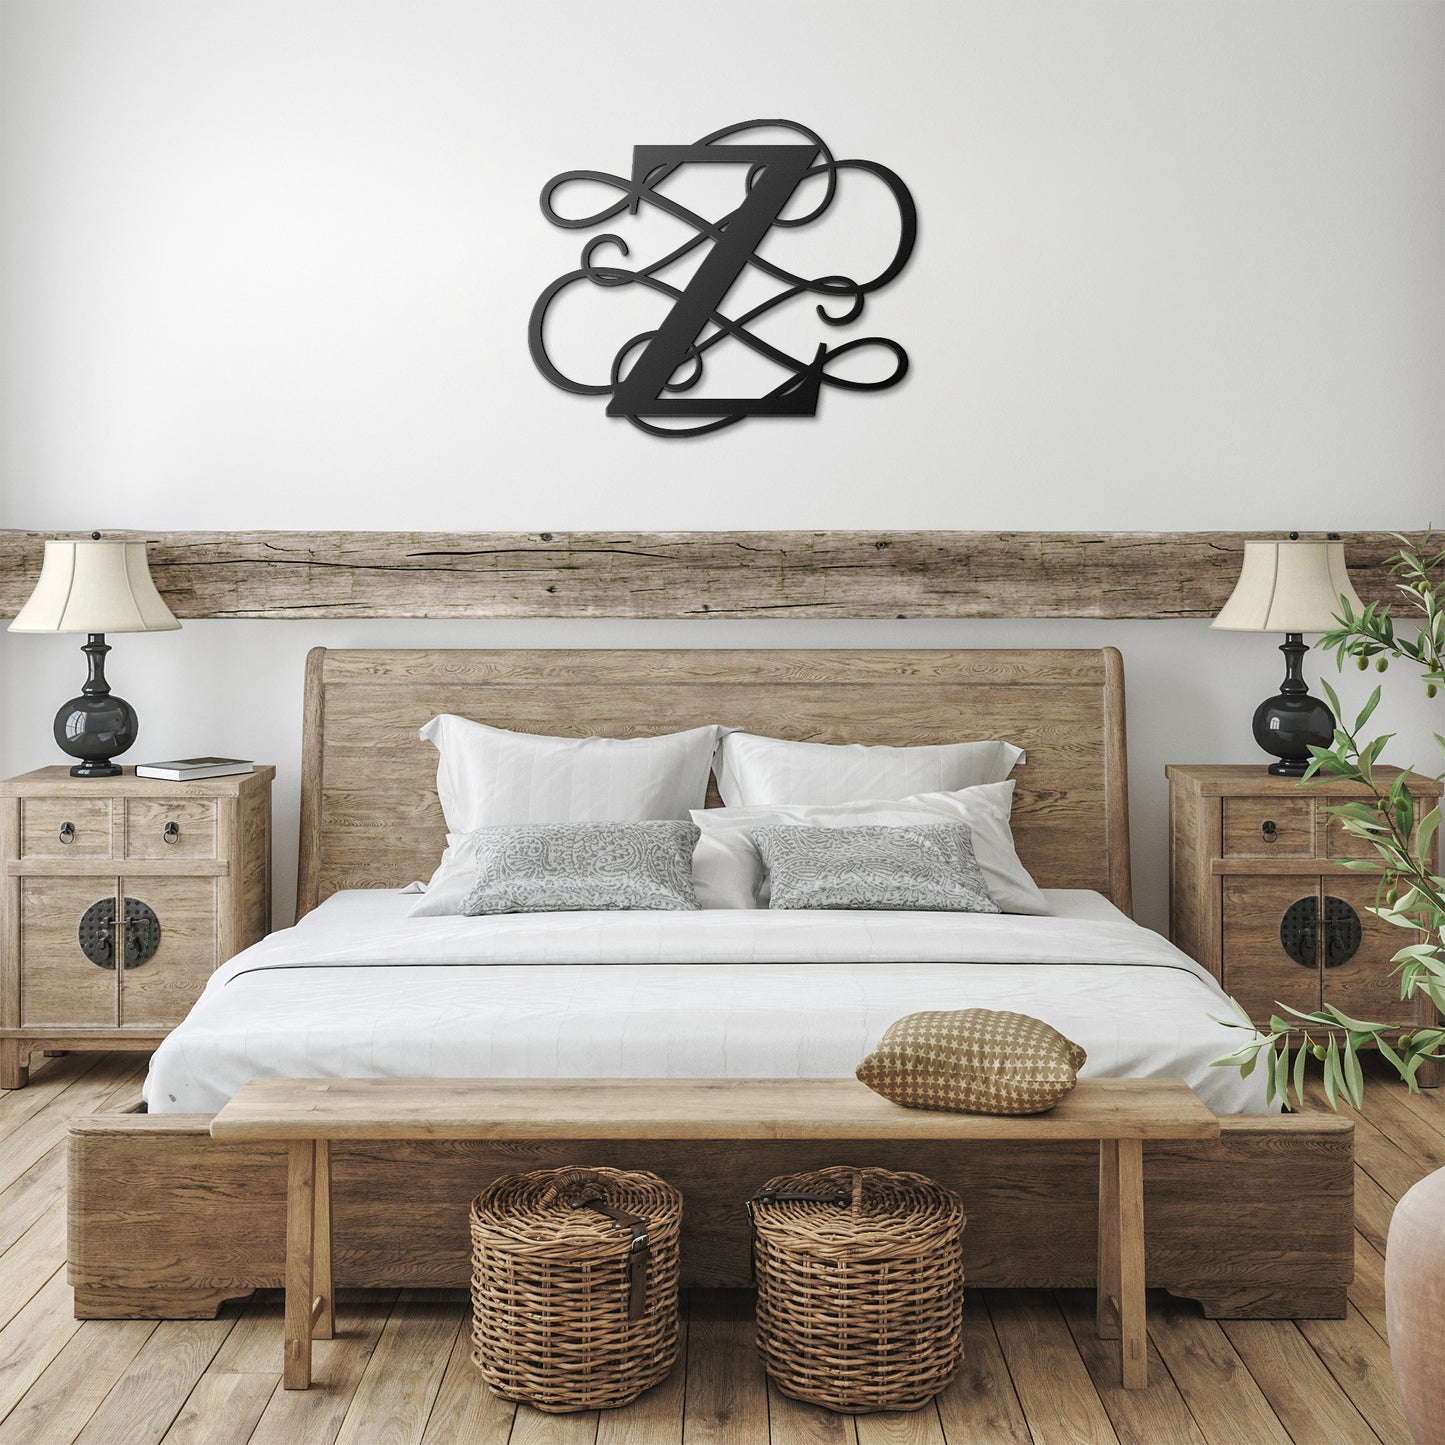 Letter Z, Your Initial, Swirl Letters, Monogram, Metal Signs, Rustic Sign, Wall Art, Wall Decor